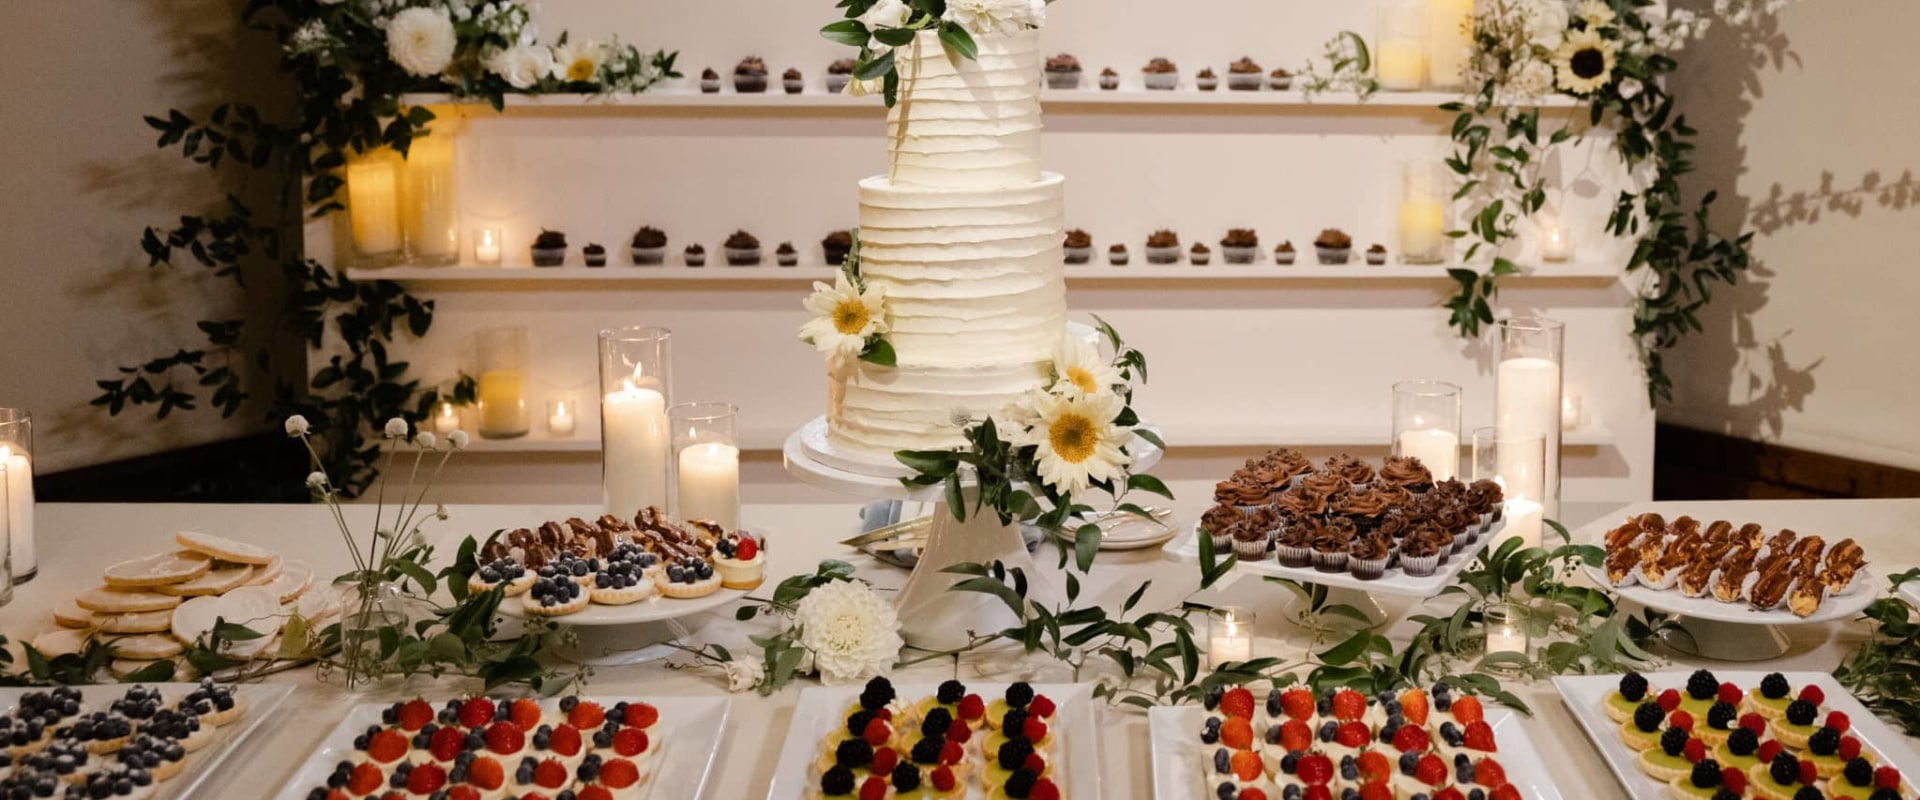 How to Choose the Perfect Wedding Bakery and Dessert Supplier